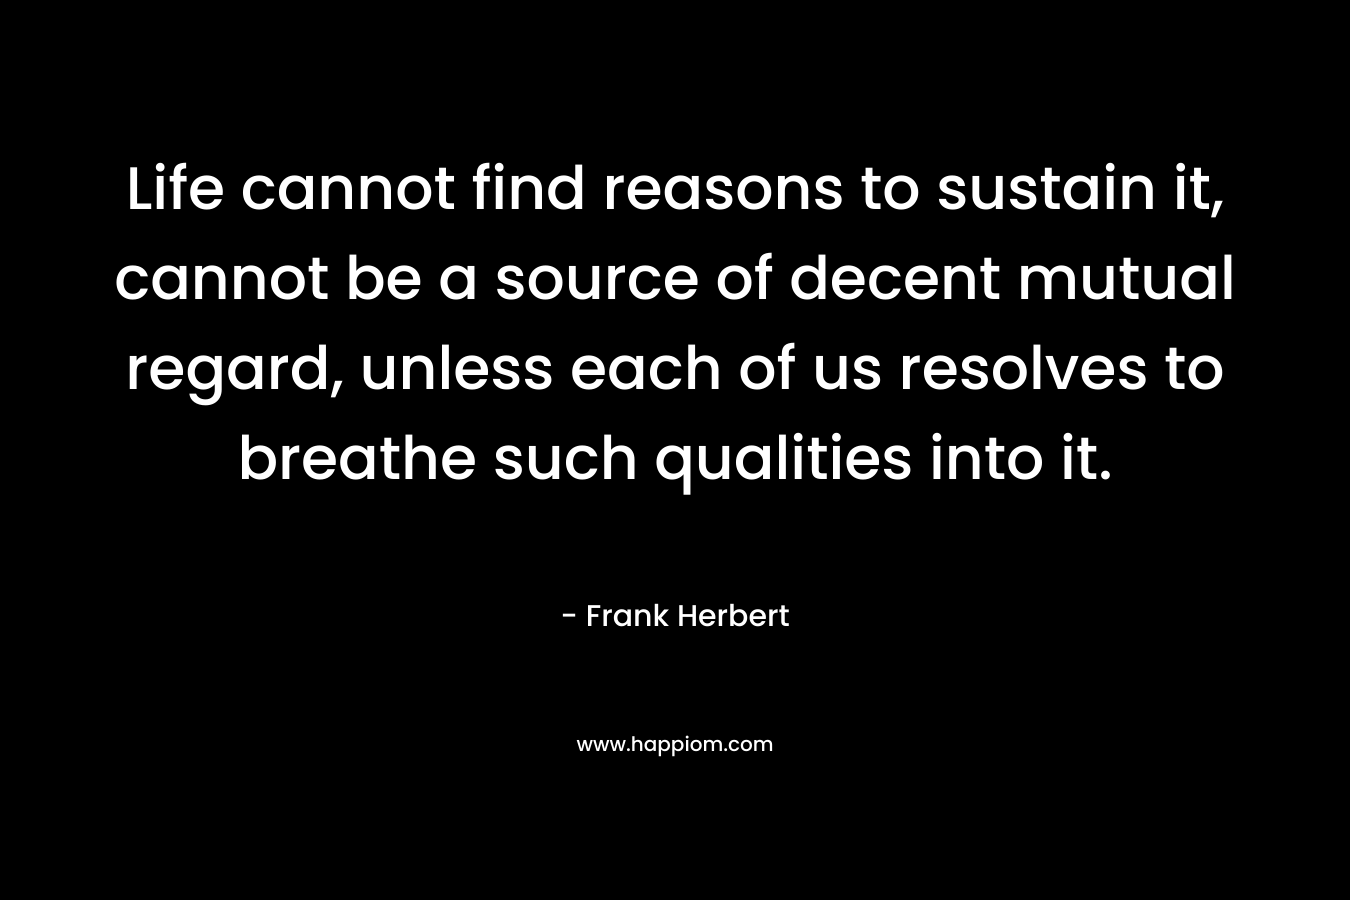 Life cannot find reasons to sustain it, cannot be a source of decent mutual regard, unless each of us resolves to breathe such qualities into it. – Frank Herbert